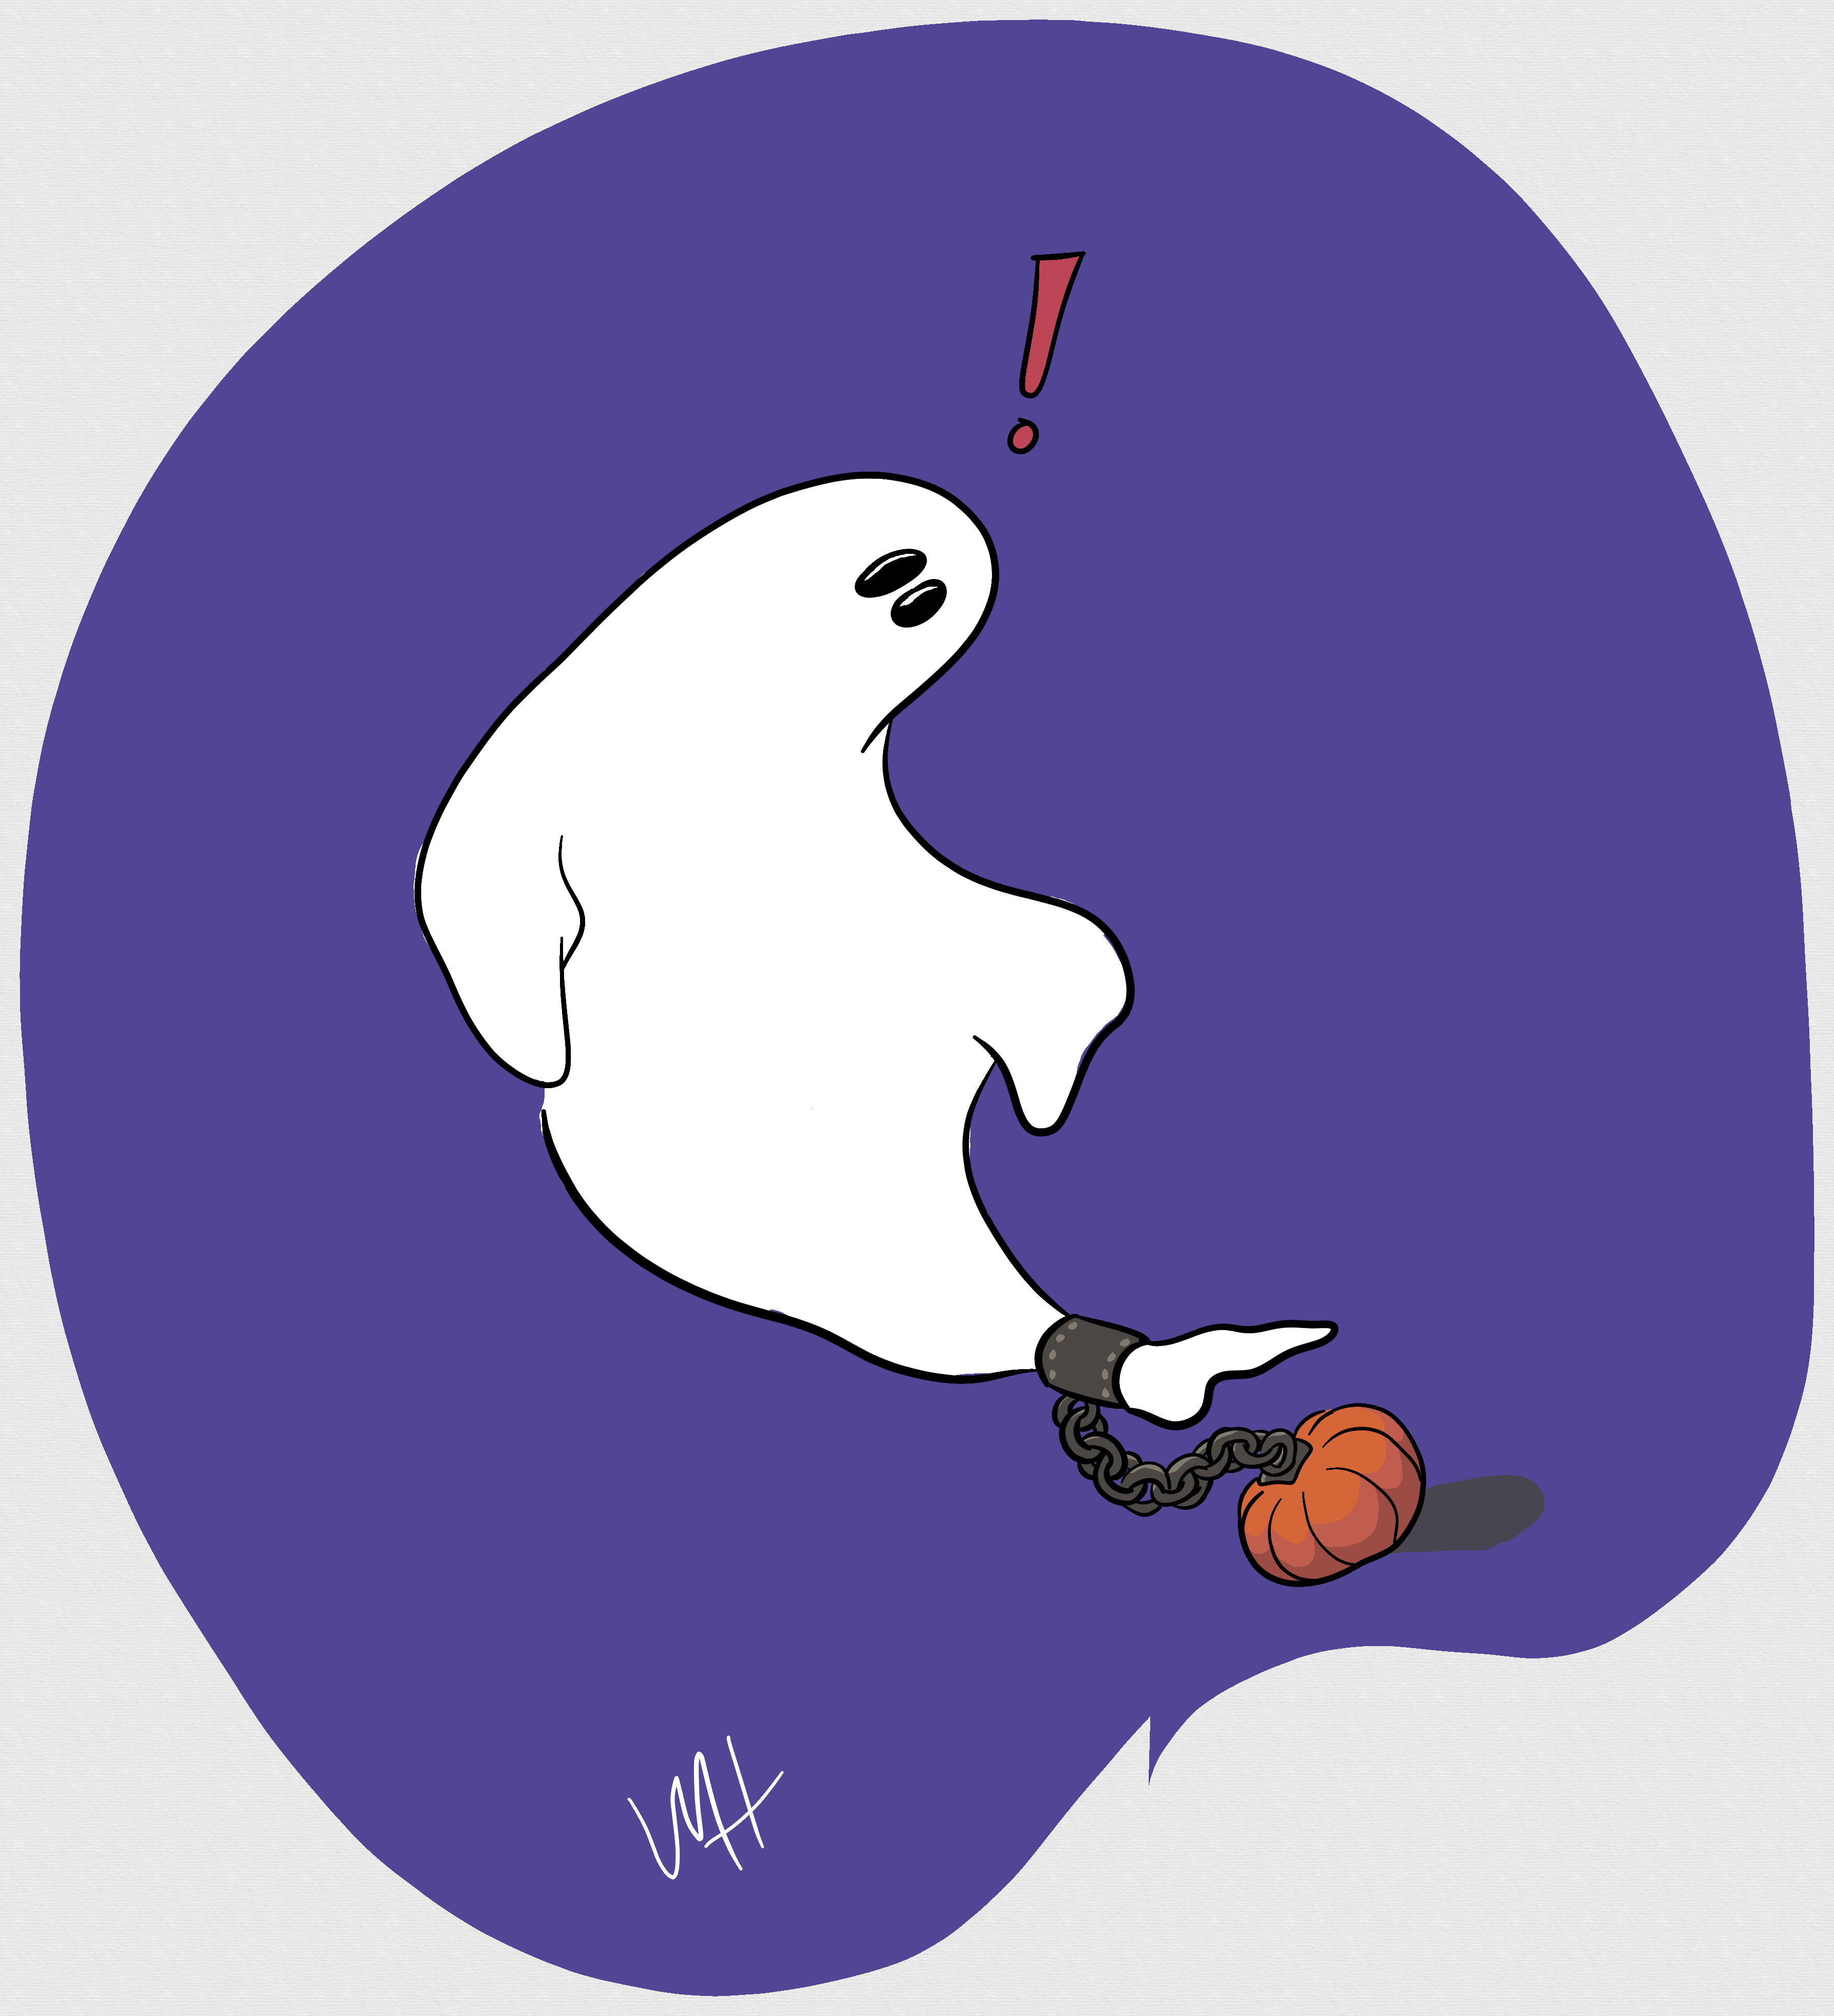 Inktober prompt: chains. A drawing of a ghost who finds itself chained to a weight shaped like a pumpkin.